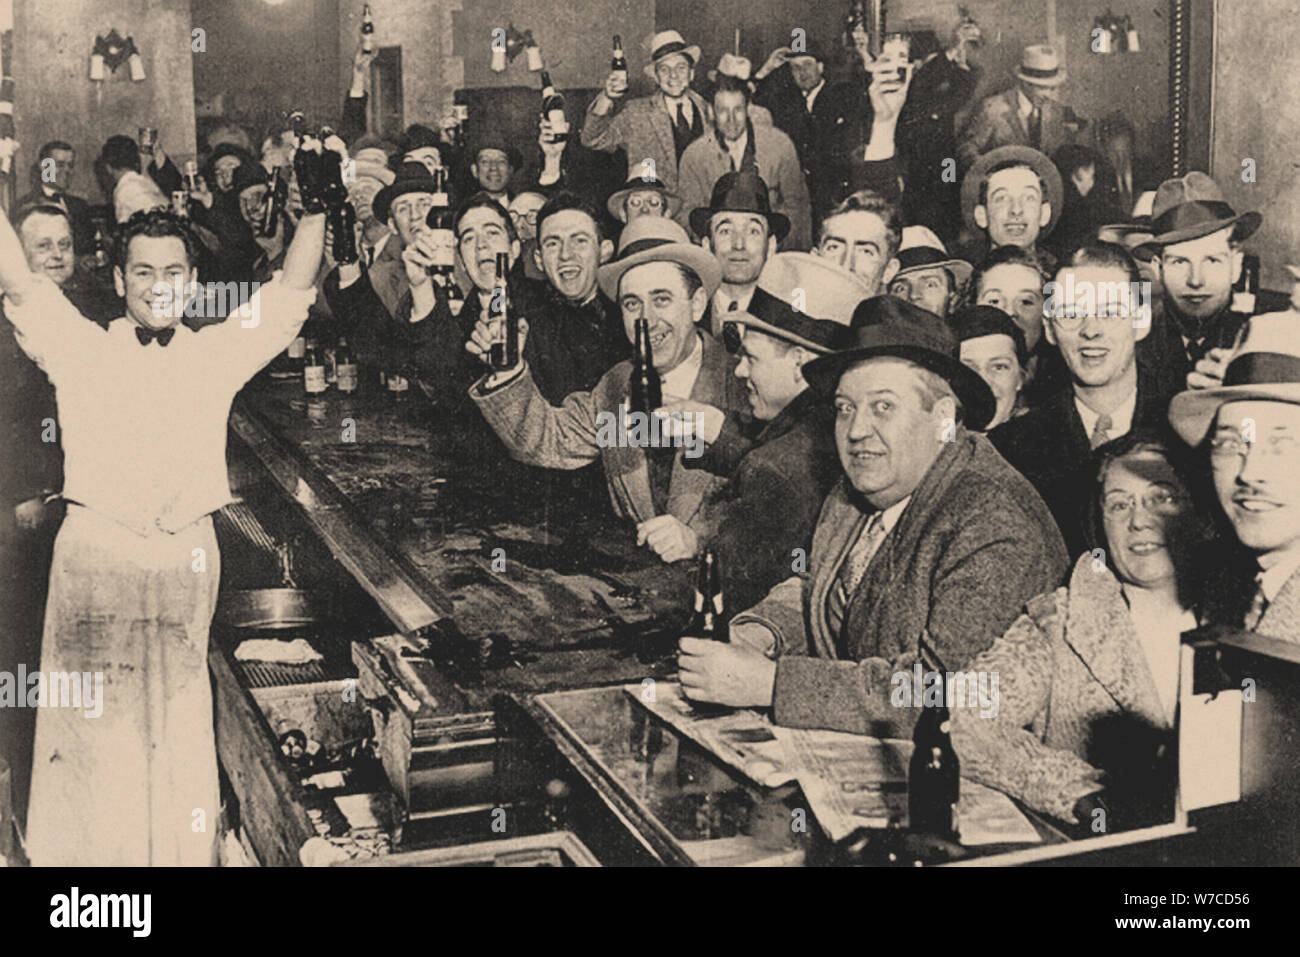 The night they ended Prohibition, Chicago, December 5th 1933. Stock Photo